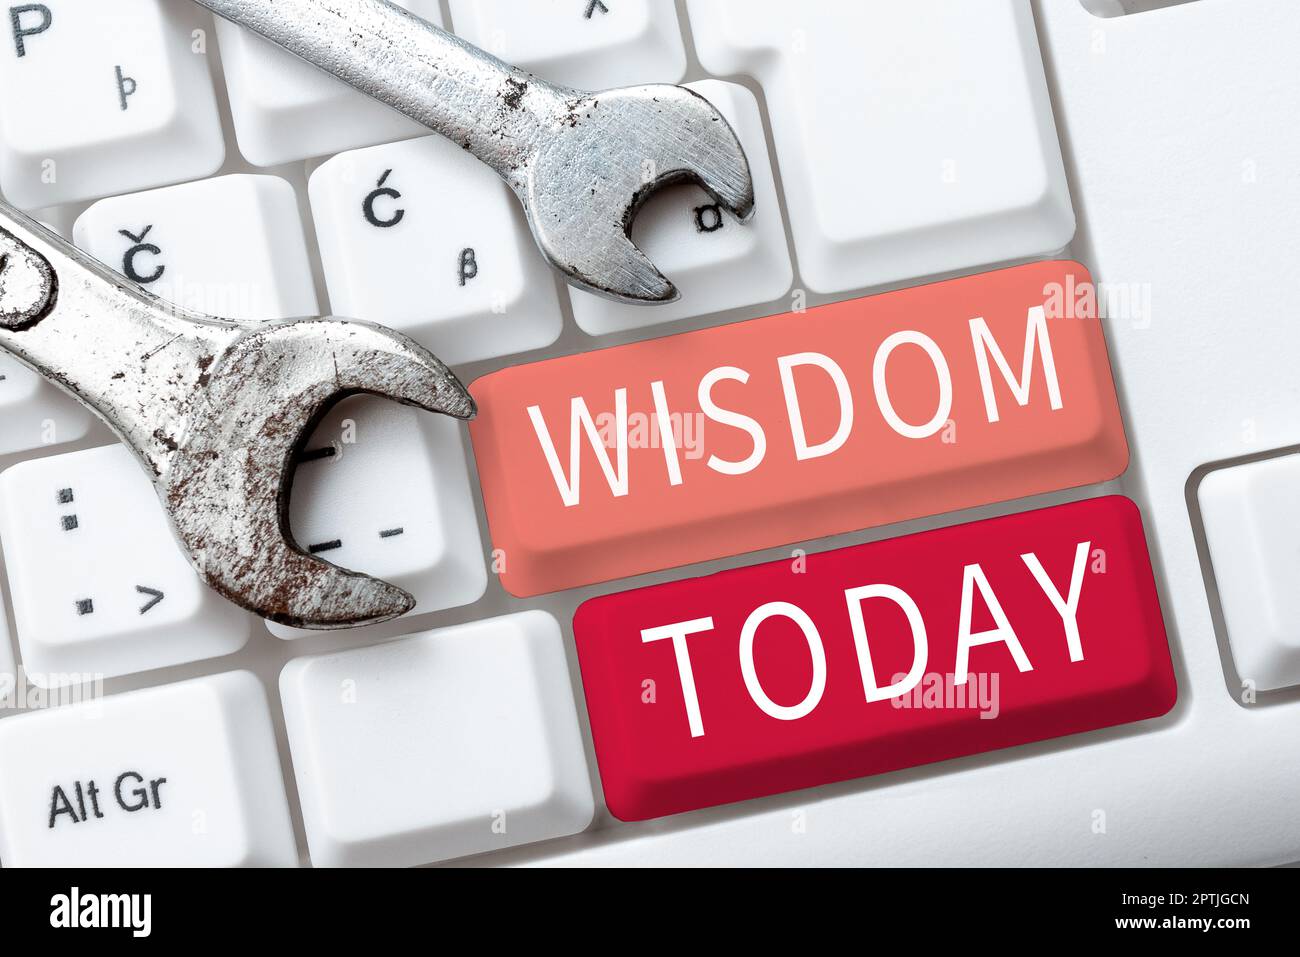 Writing displaying text Wisdom, Concept meaning body of knowledge and principles that develops within specific period Stock Photo